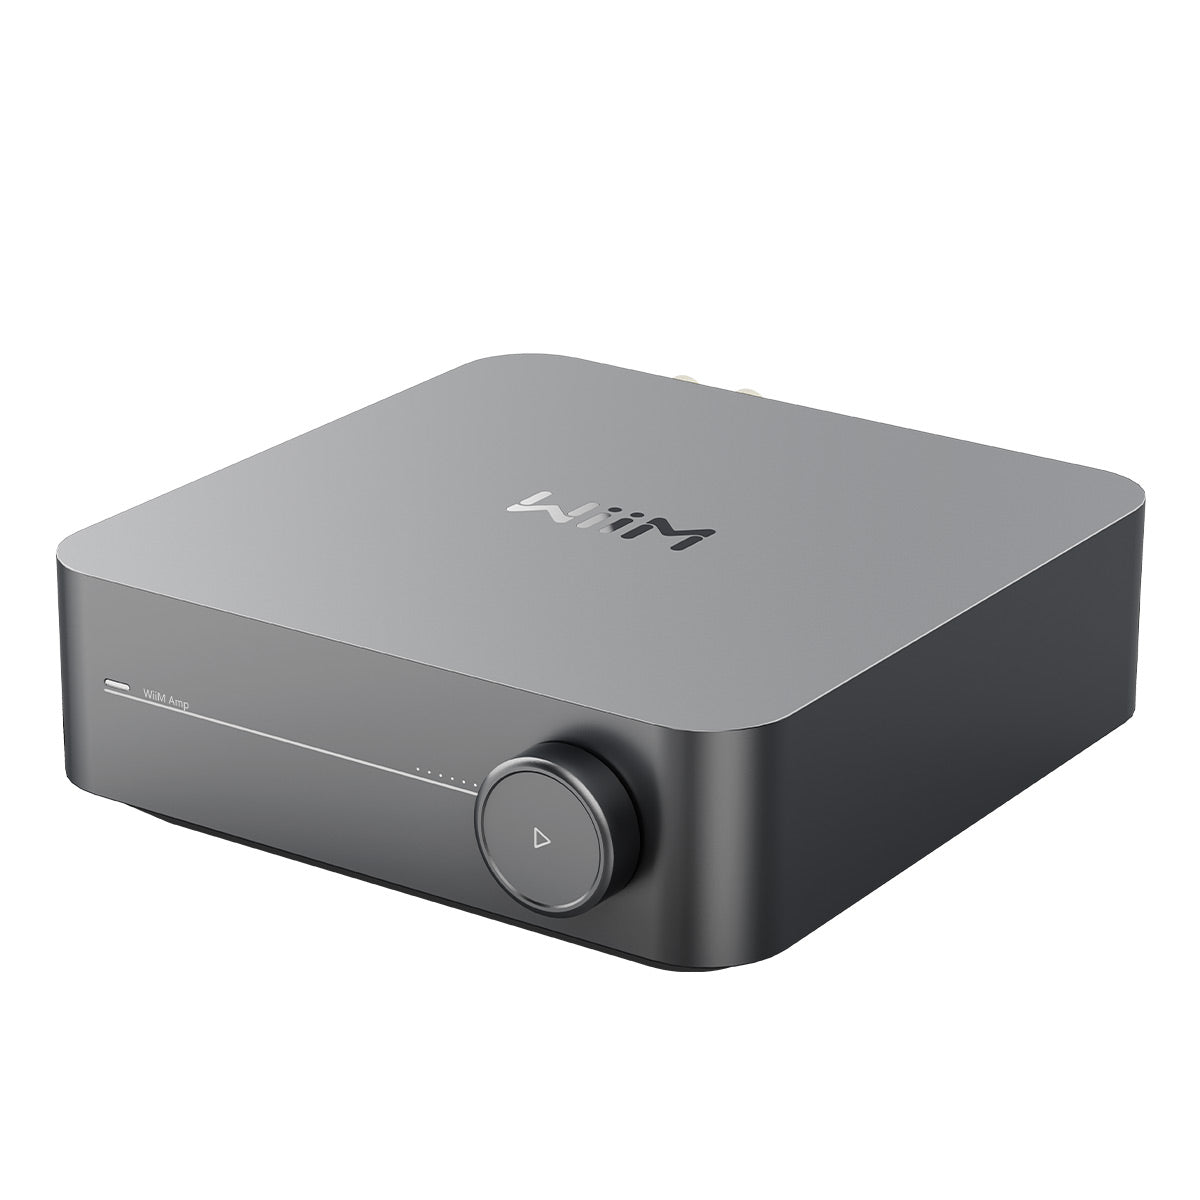 WiiM Amp Multiroom Streaming Amplifier with AirPlay 2, Chromecast, & Voice Control (Grey)